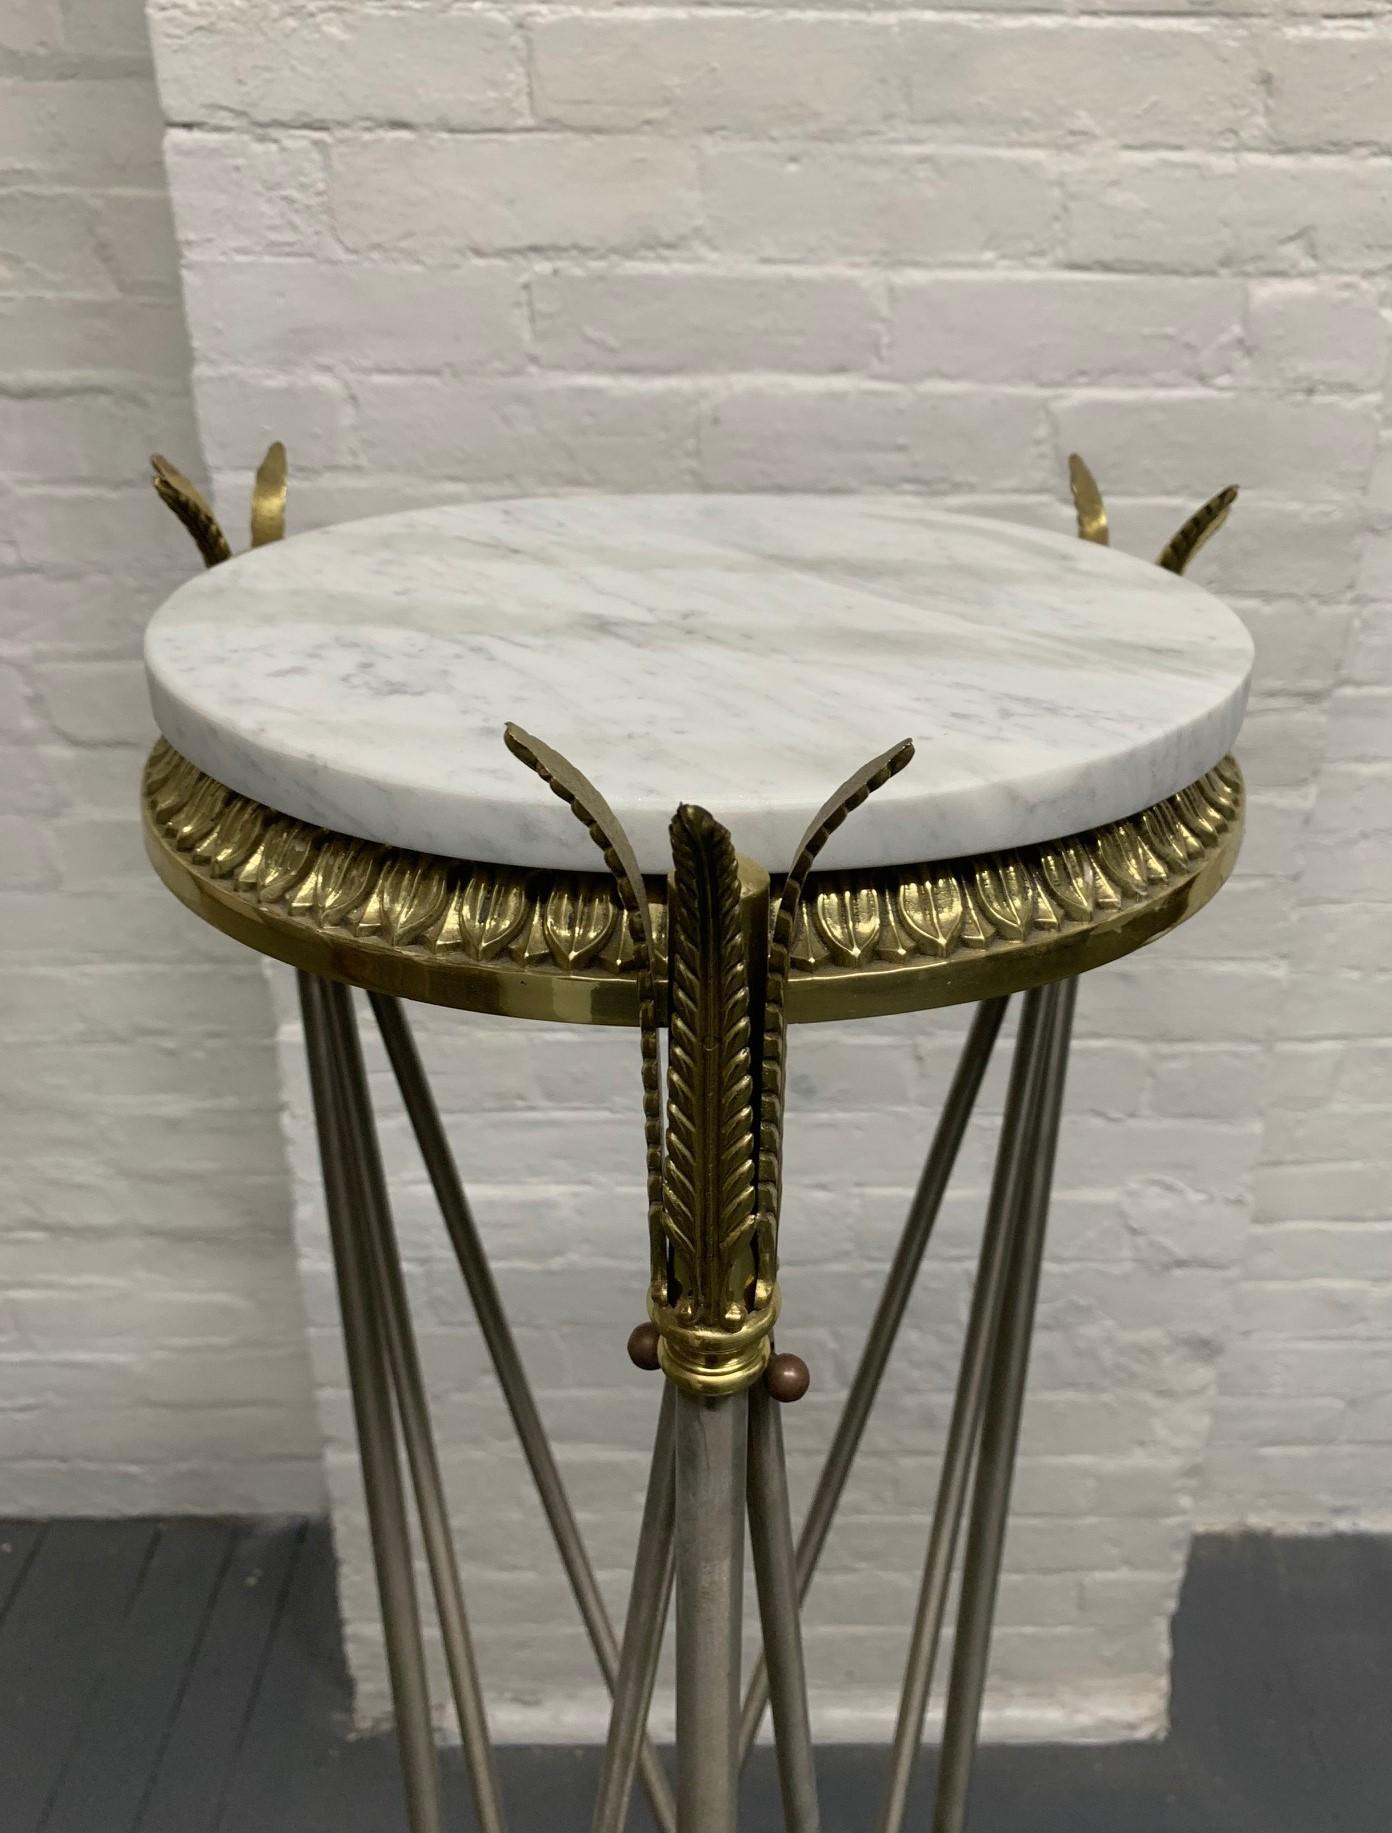 French Directoire style pedestal. Pedestal has a white marble top with a steel and decorative brass frame.